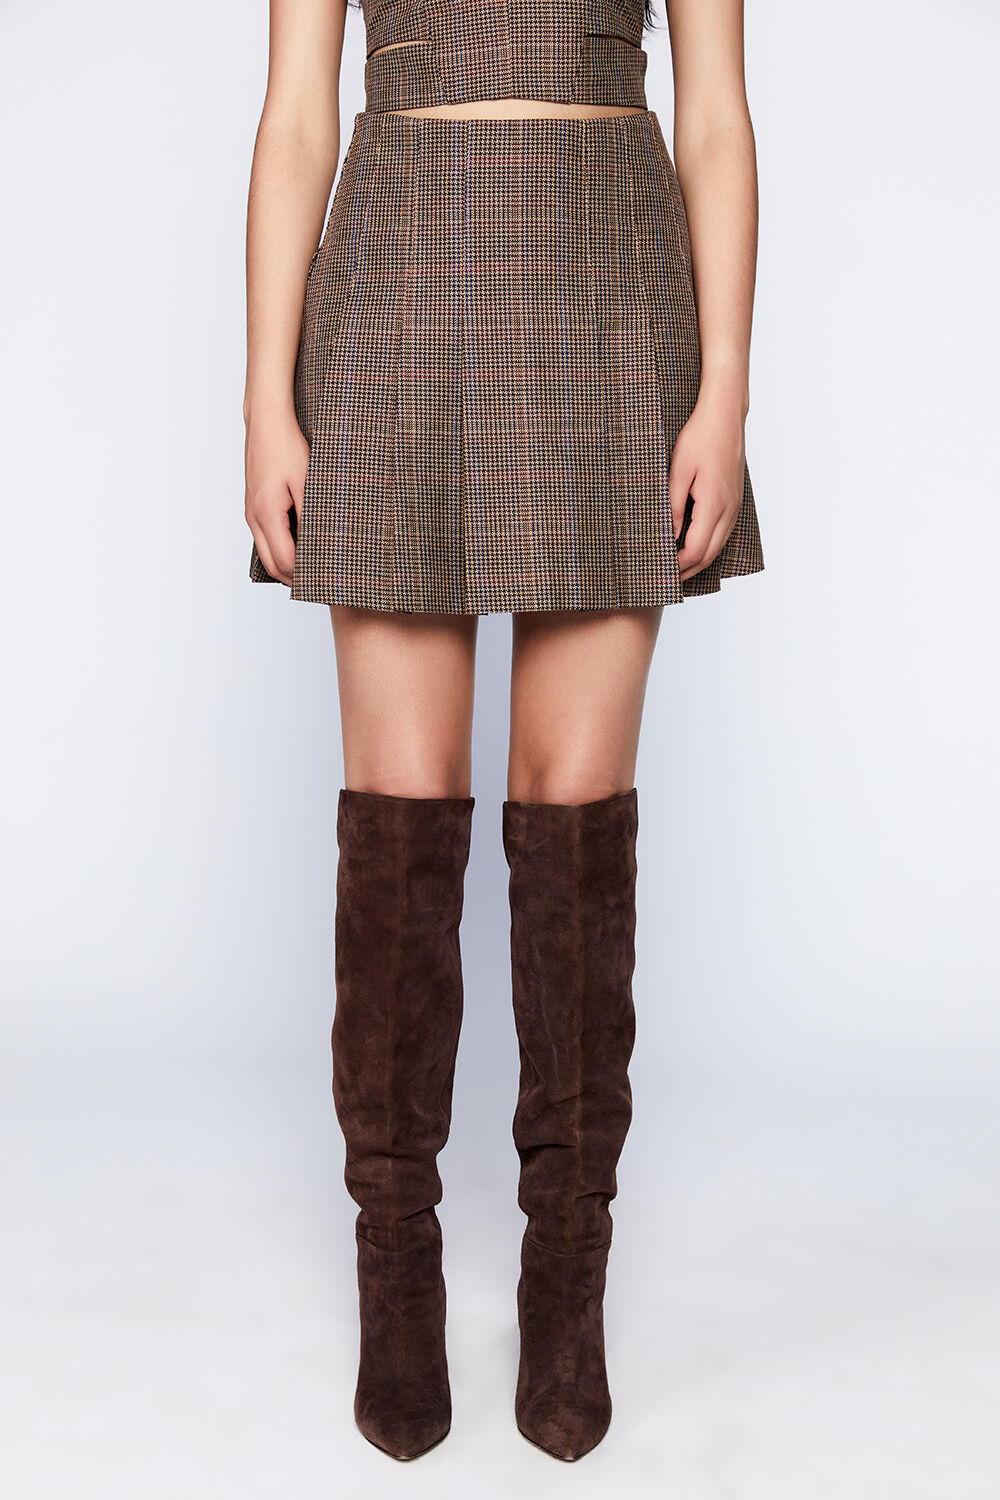 ZIGI PLEATED SKIRT in colour TOBACCO BROWN